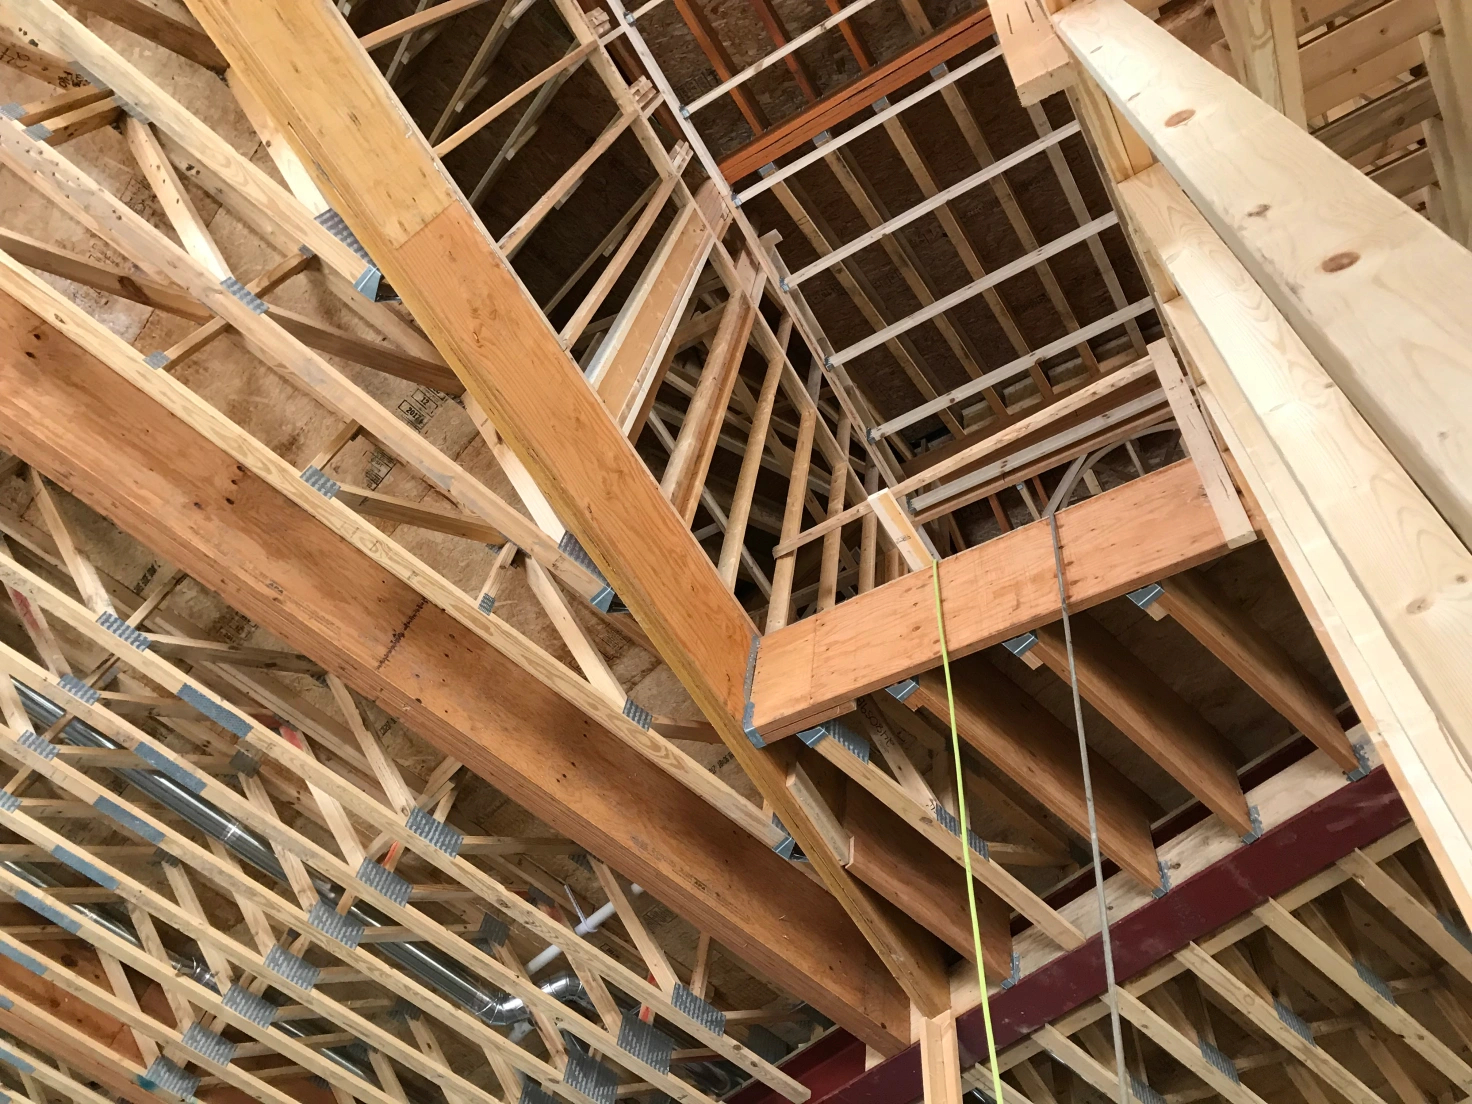 Looking up into the frame of a house under construction